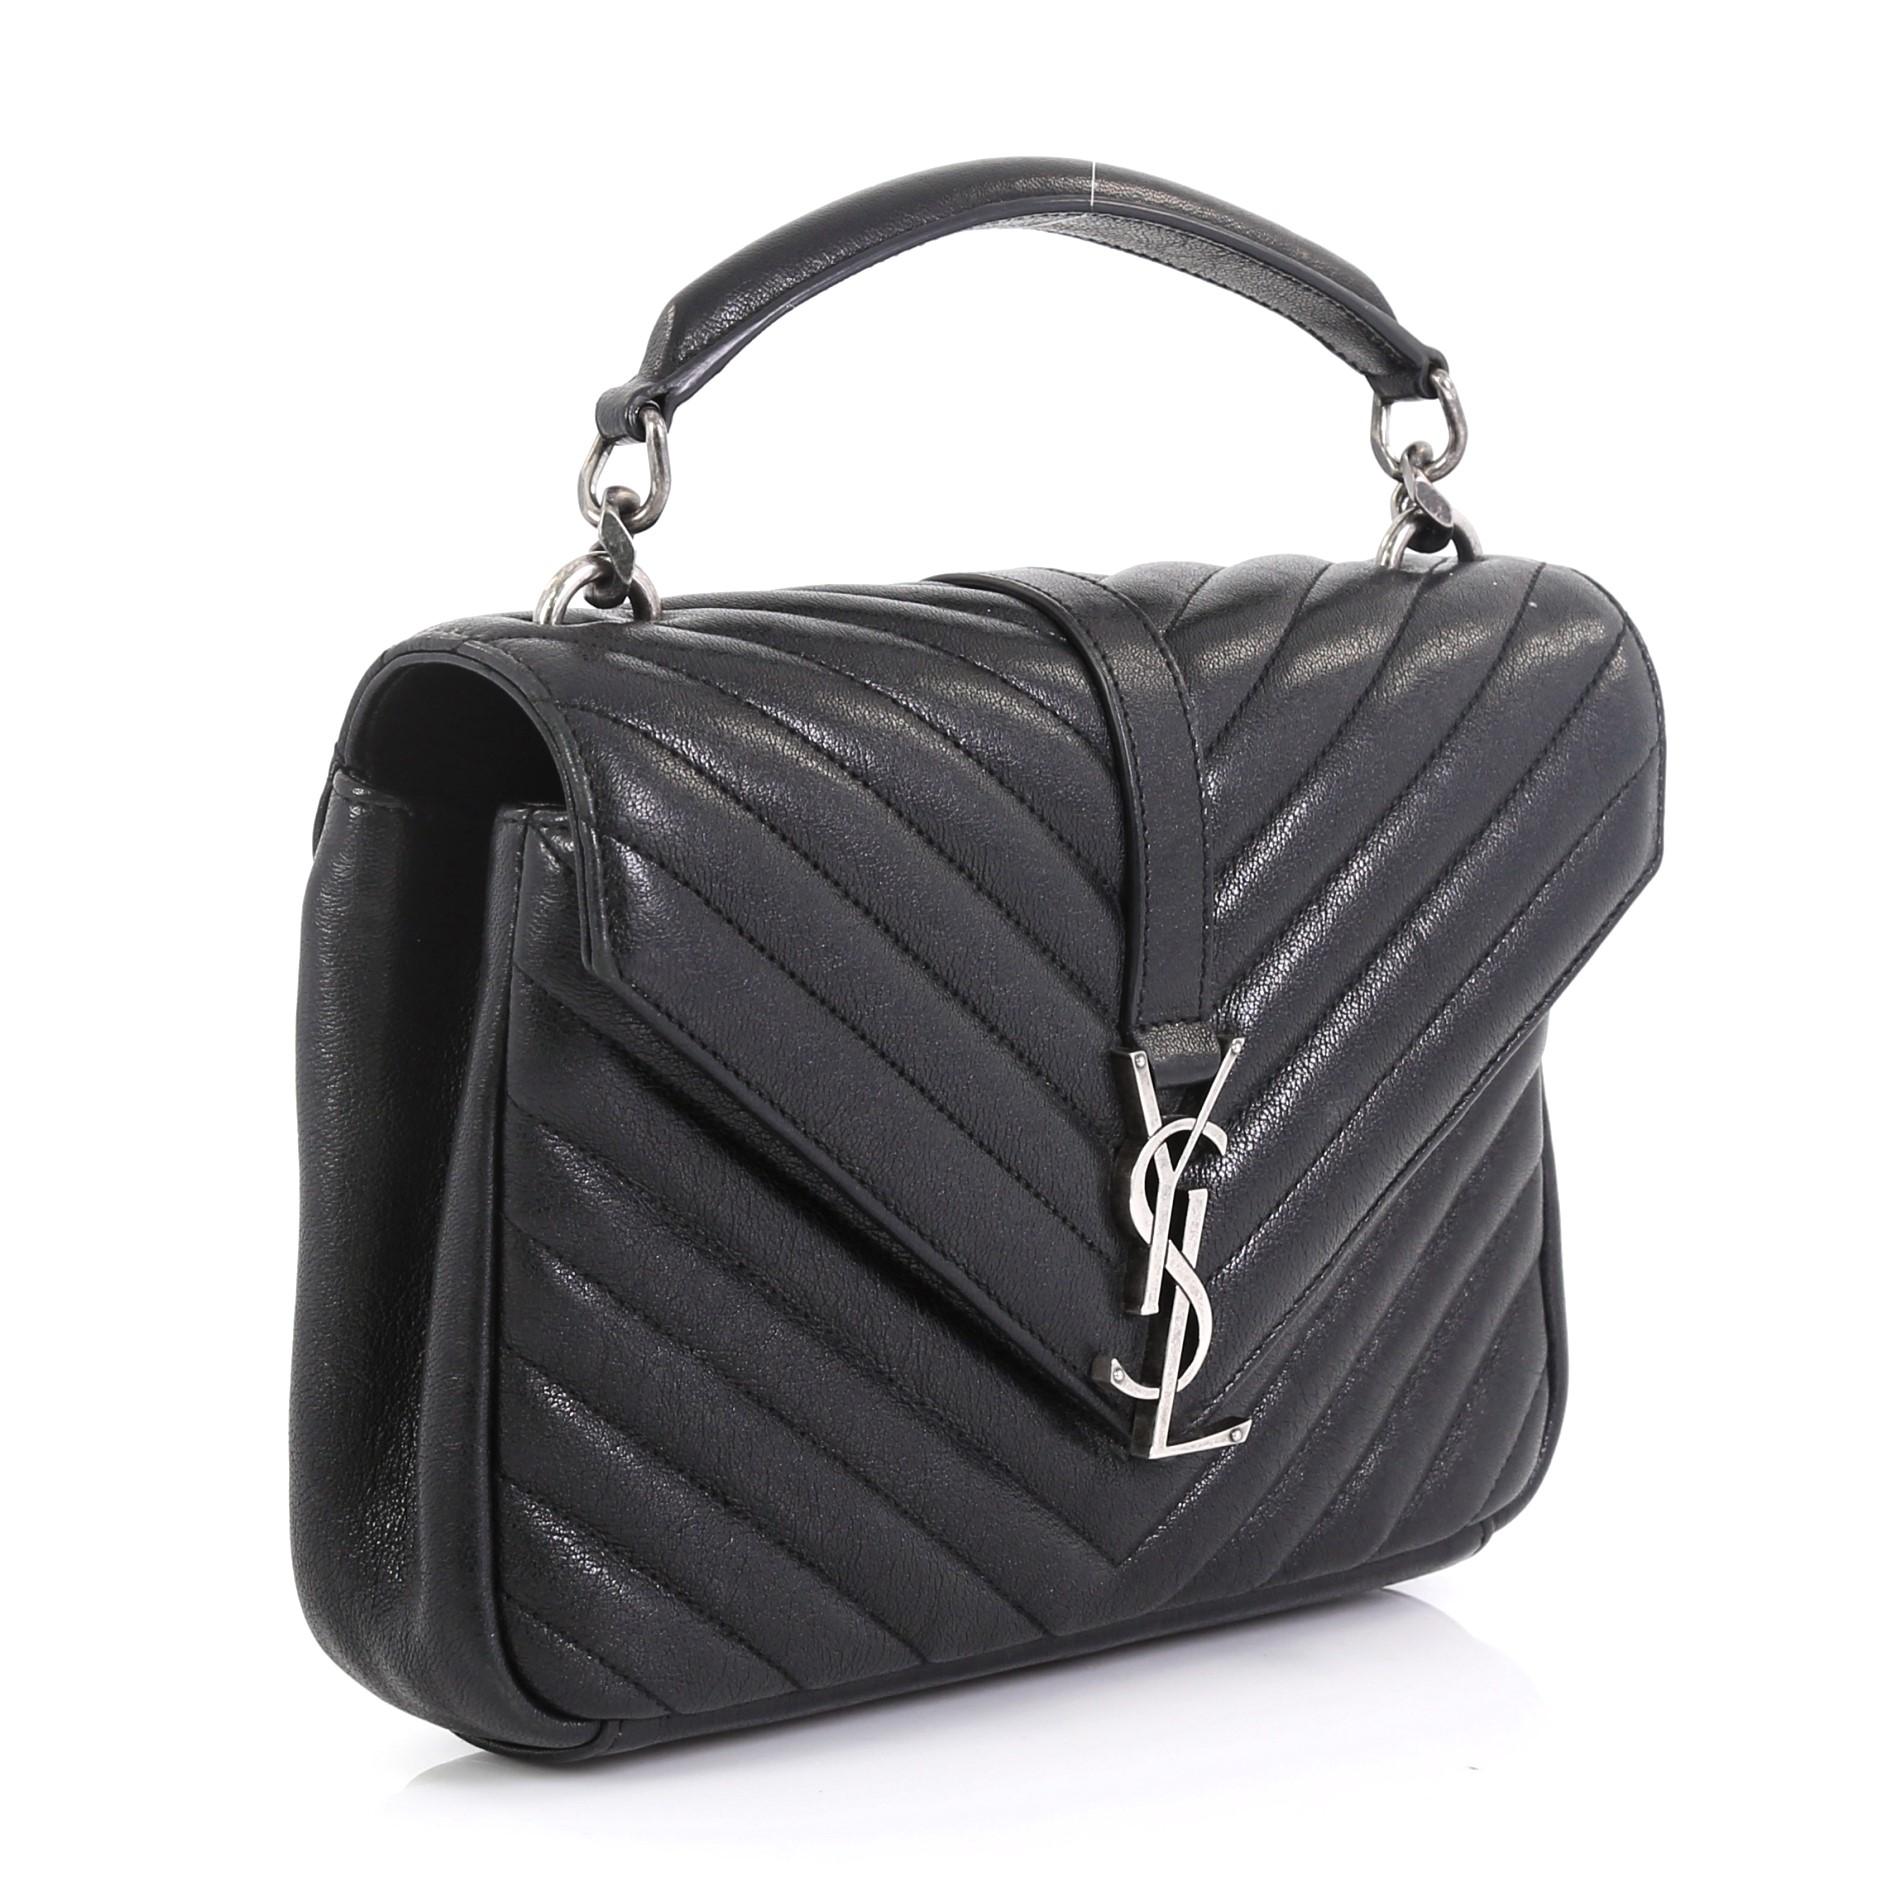 This Saint Laurent Classic Monogram College Bag Matelasse Chevron Leather Medium, crafted in black matelasse chevron leather, features a single top handle, exterior back pocket, and aged silver-tone hardware. Its magnetic snap closure opens to a